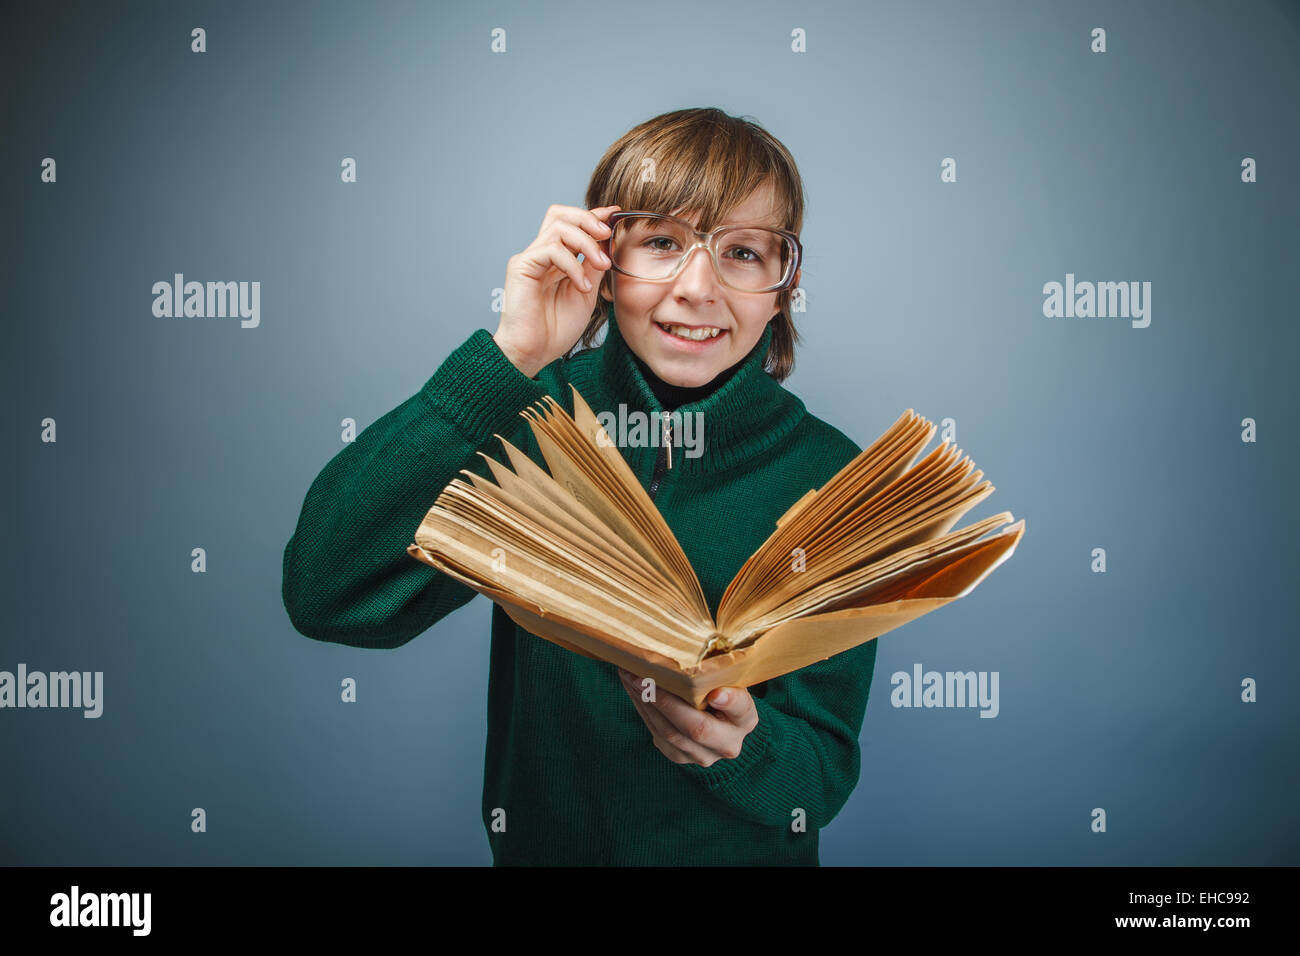 boy teenager European appearance in retro dress with glasses rea Stock Photo